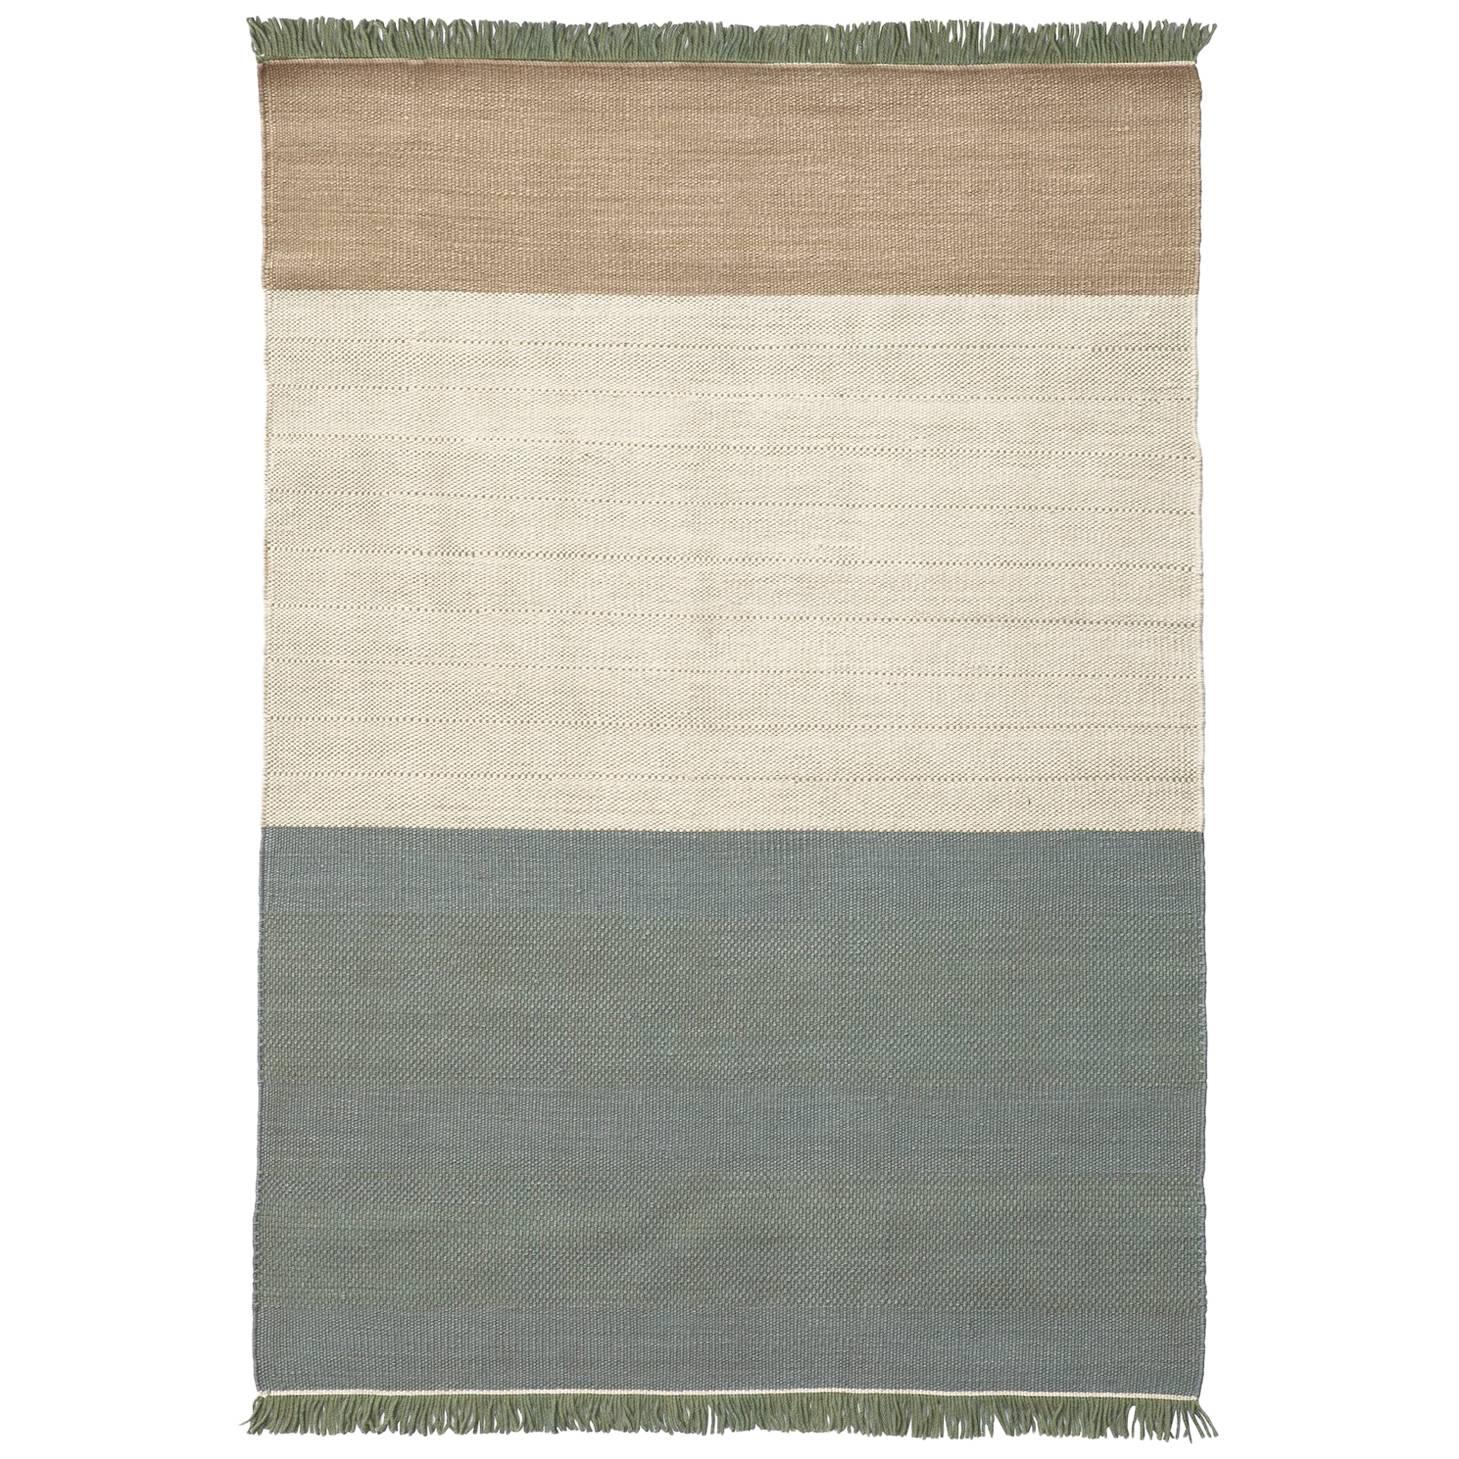 Hand-Loomed Tres Stripes Rug in Sage by Nani Marquina & Elisa Padron, Large For Sale